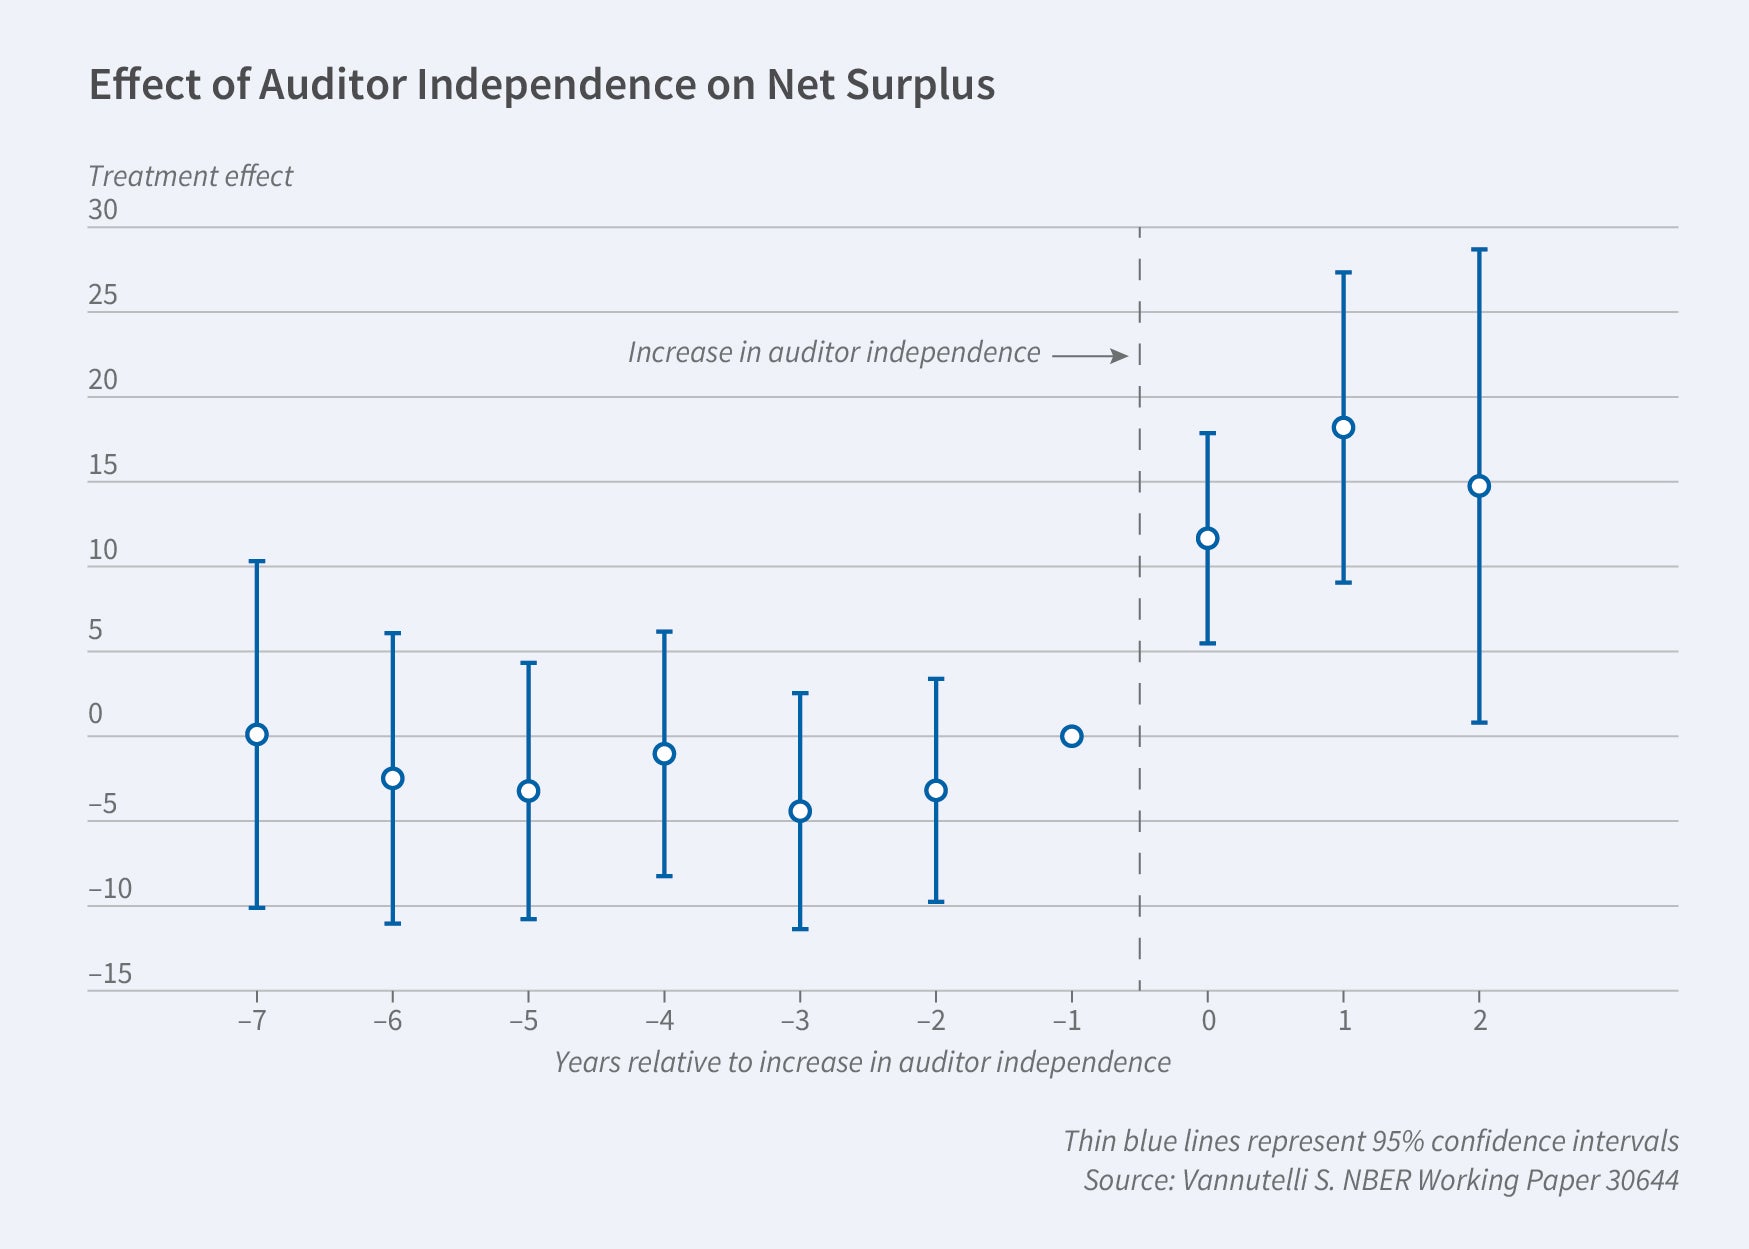 Program Report Figure 3: This figure is a plot of singular dots, including a 95 percent confidence interval, for every x value titled Effect of Auditor Independence on Net Surplus.  The y-axis is labeled Treatment effect and ranges from -15 to 30. The x-axis is labeled Years relative to increase in auditor independence and ranges from -7 to 2.  A vertical dotted line is placed between -1 and 0 indicating an increase in auditor independence. Going from -1 to 0 on the x-axis corresponds to a shift of 0 to about 12 for treatment effect. Data points to the left of the dotted line have lower values than points to the right. On the left, all values are 0 or below while on the right, values range between 10 and 20.  The figure annotation reads Thin blue lines represent 95% confidence intervals. The source line reads Source: Vannutelli S. NBER Working Paper 30644.